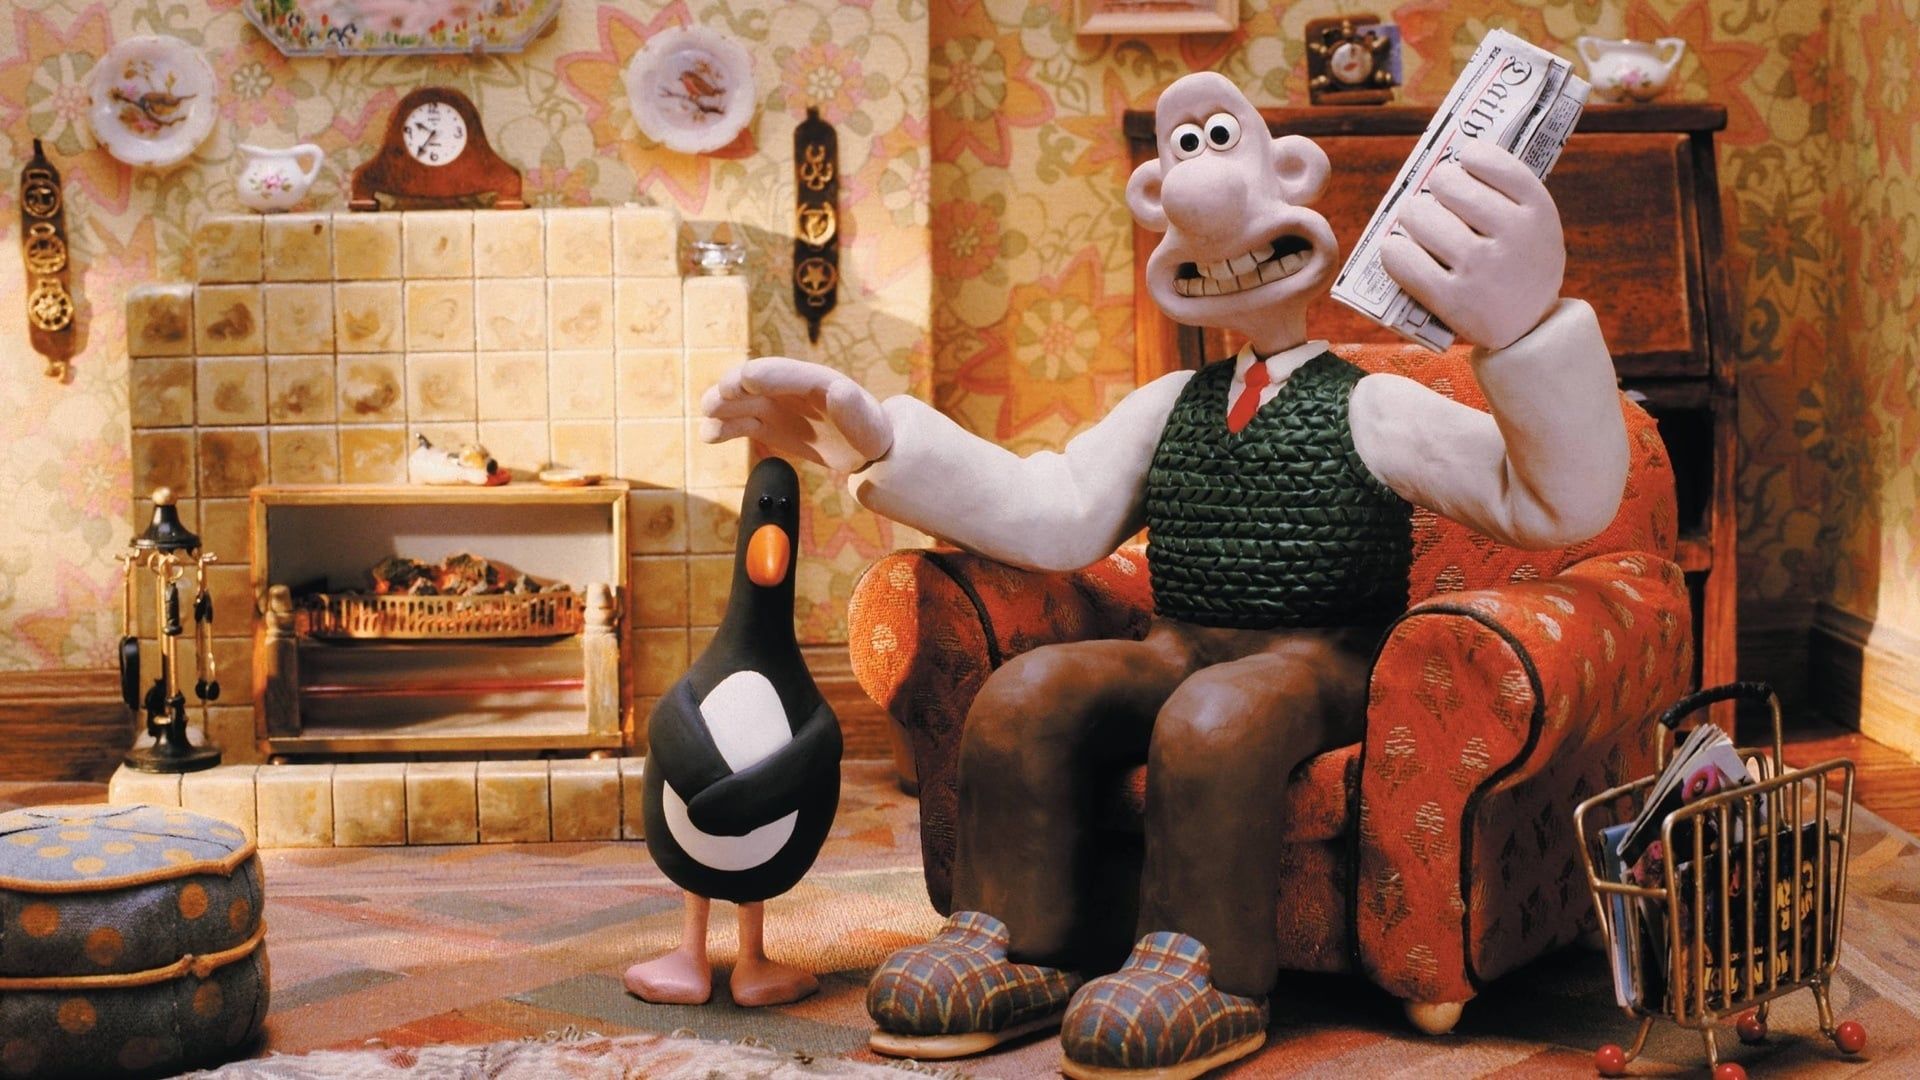 Wallace & Gromit: The Wrong Trousers background